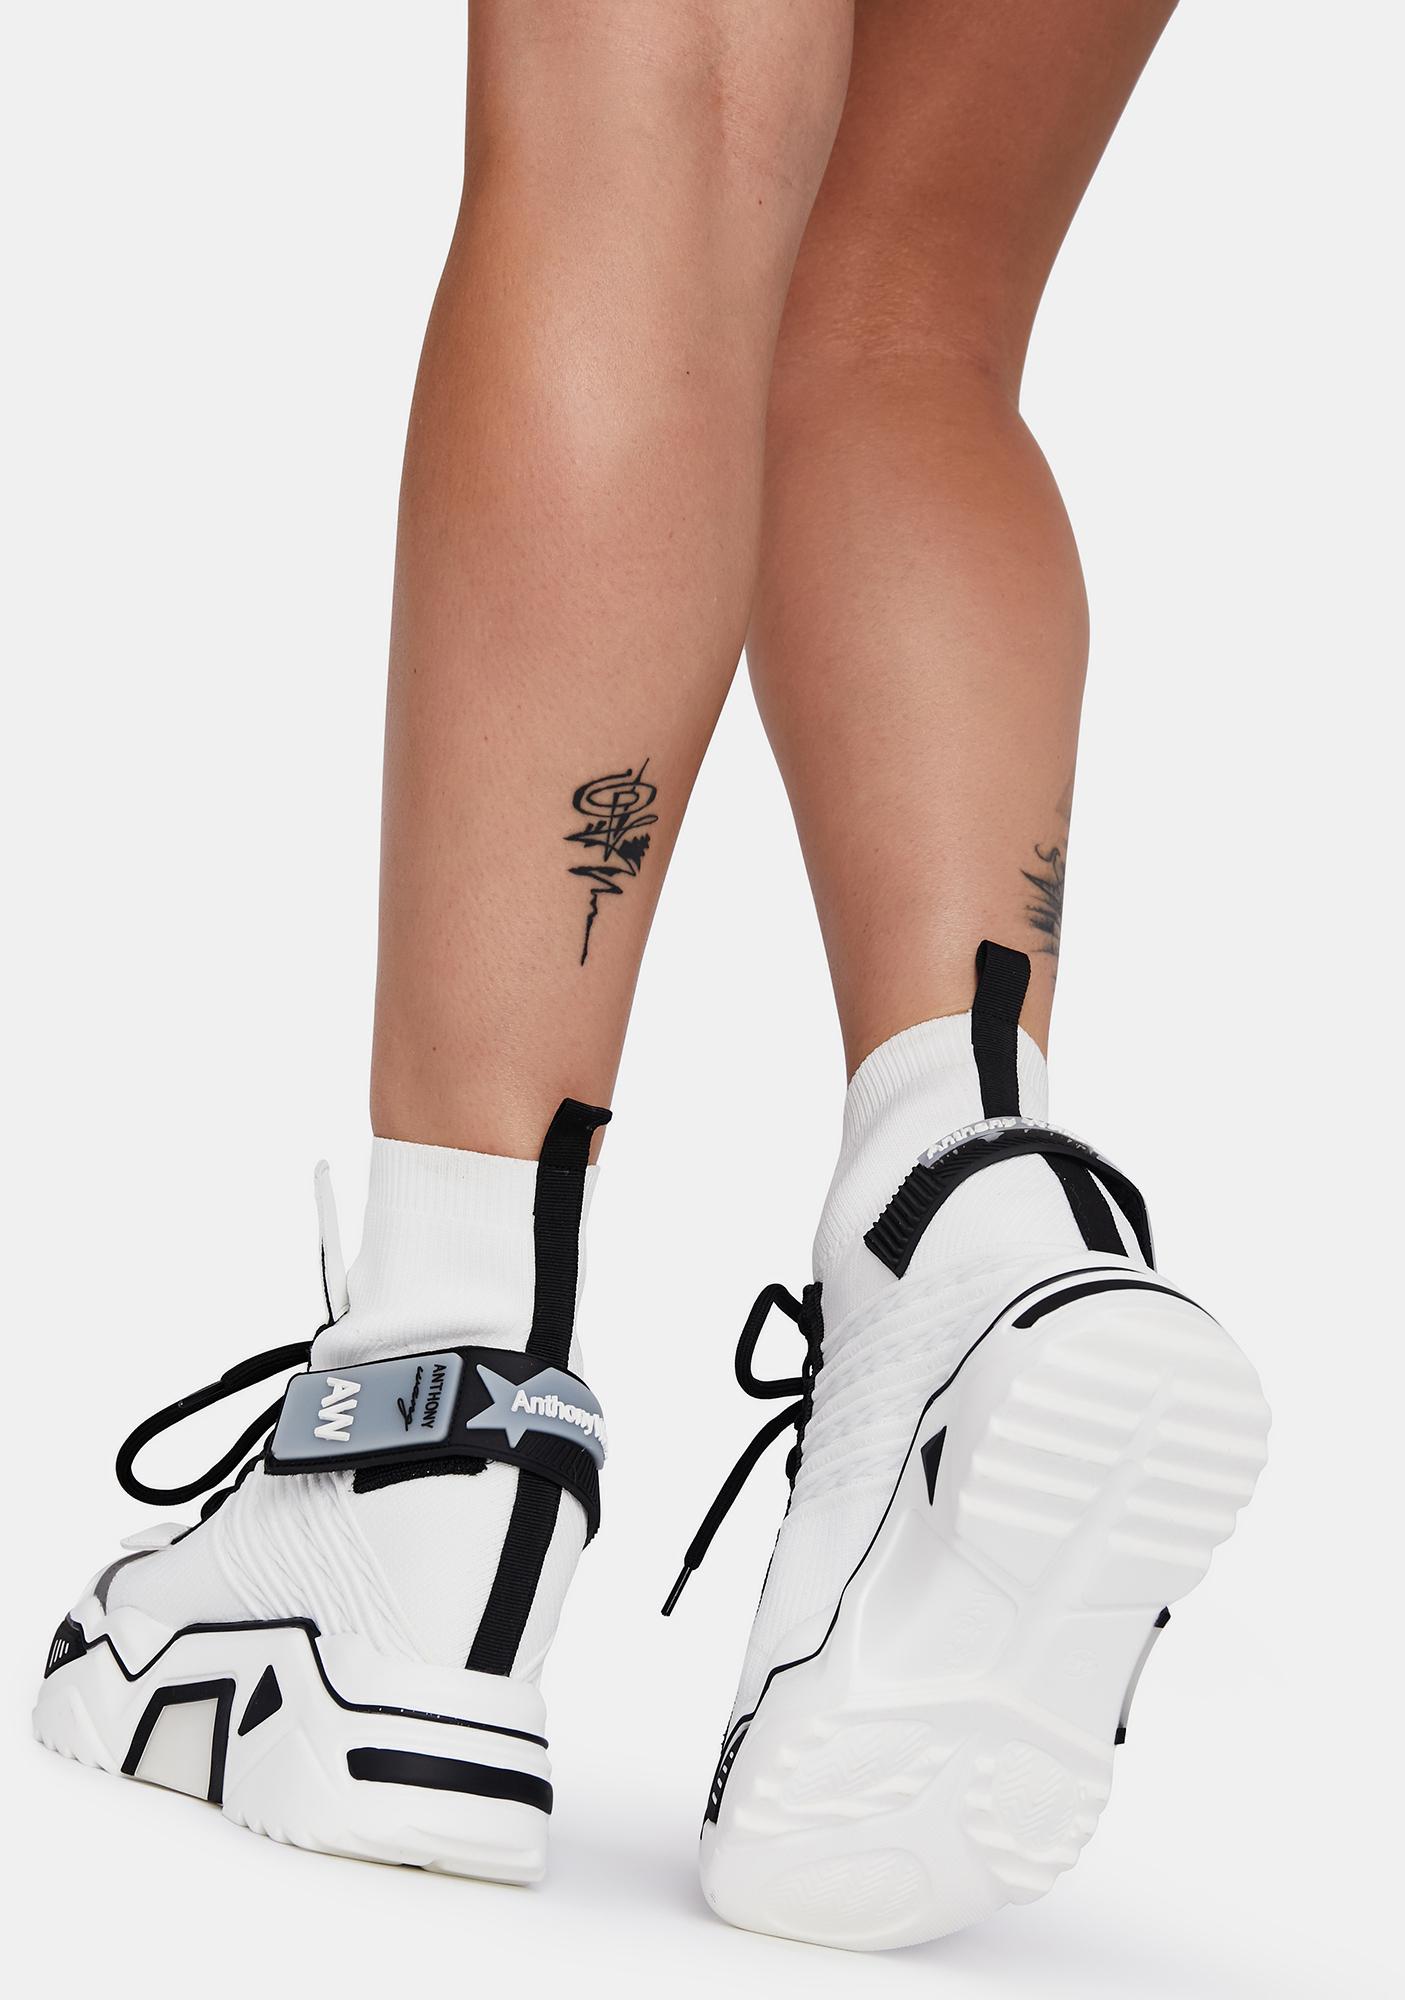 Anthony Wang White Clout Chasin' Platform Sneakers | Dolls Kill